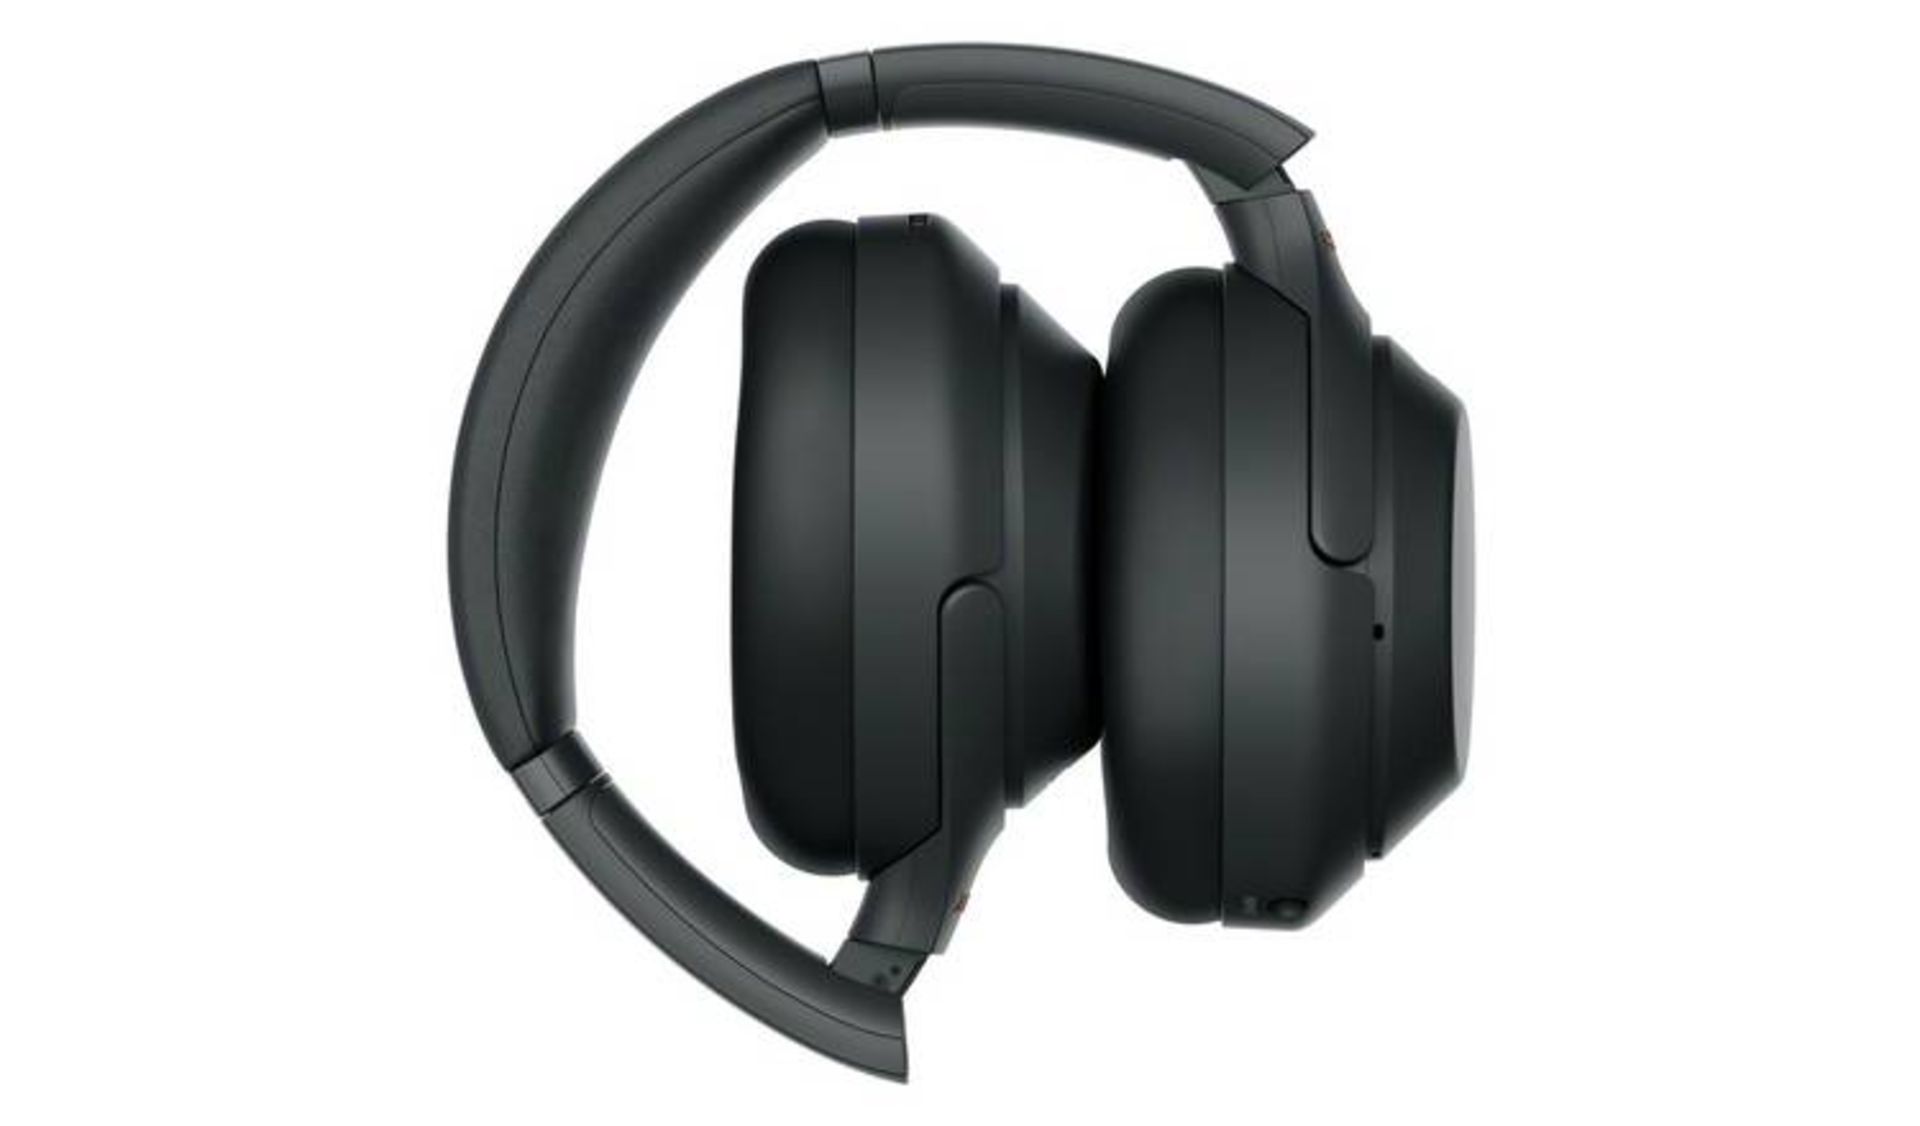 AS NEW CONDITION SONY WH-1000XM3 ON-EAR WIRELESS HEADPHONES - BLACK *NO VAT* - Image 4 of 9